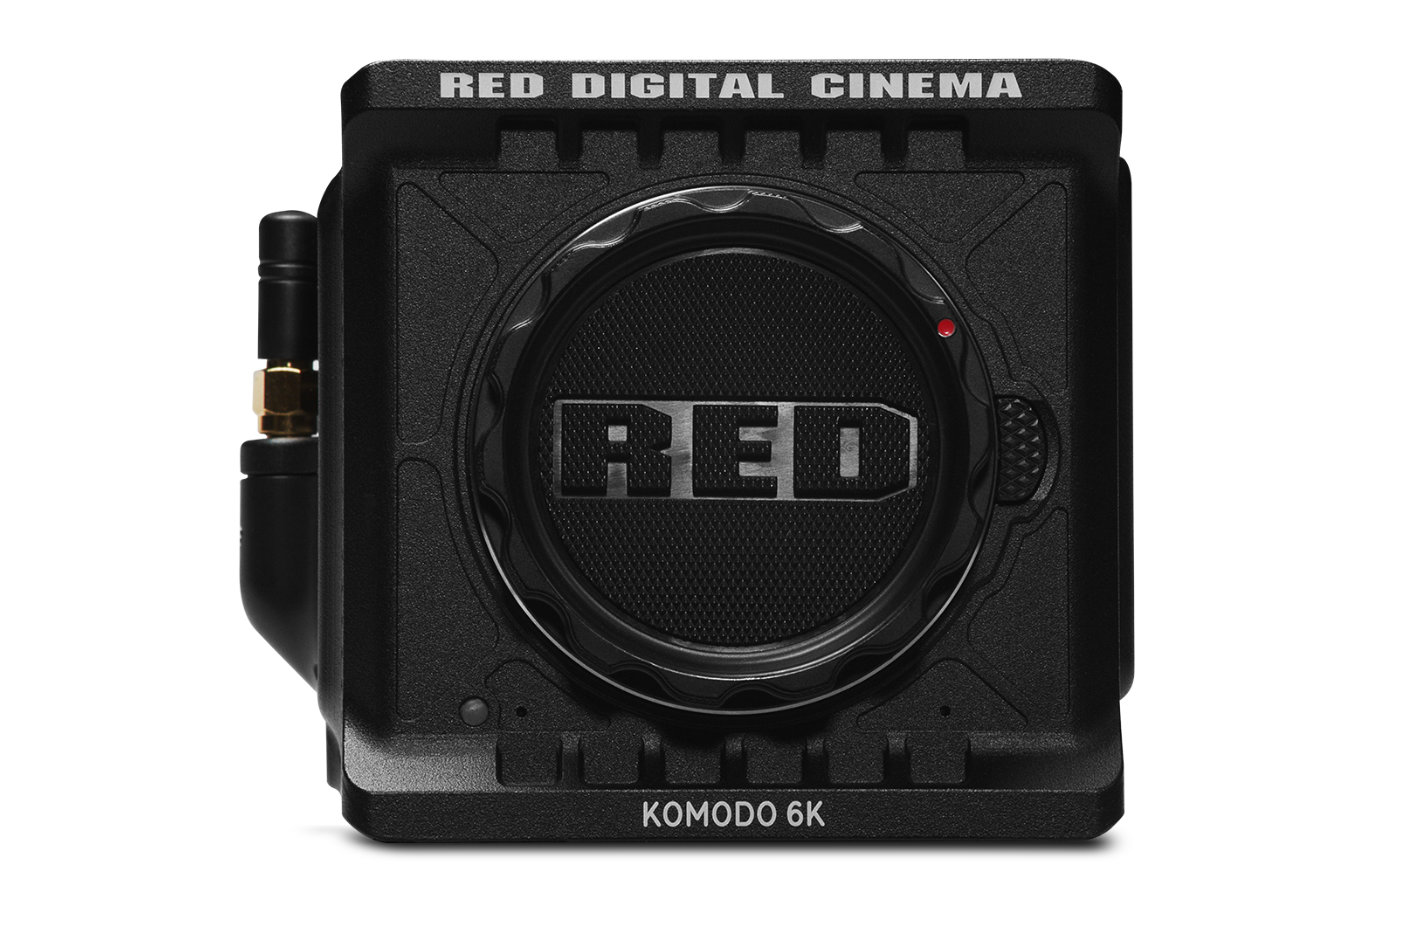 MRMC shares booth with RED at Cine Gear Expo LA